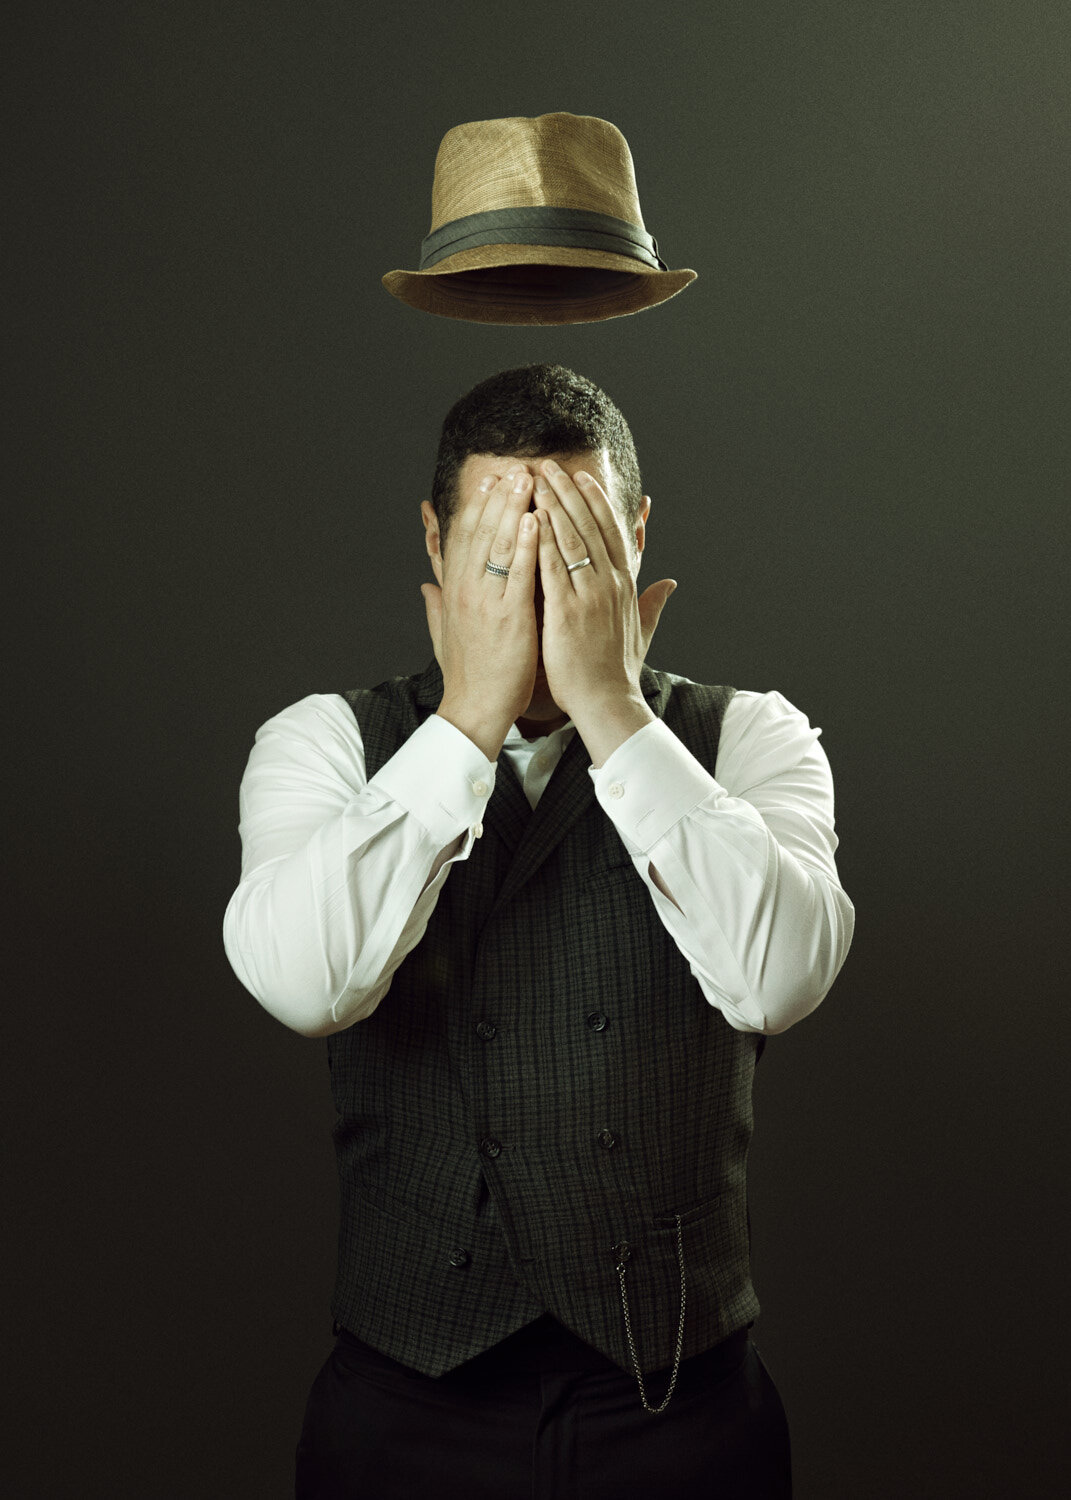 Magritte inspired surreal image of singer with floating hat by studio portrait photographer Hanna Agar